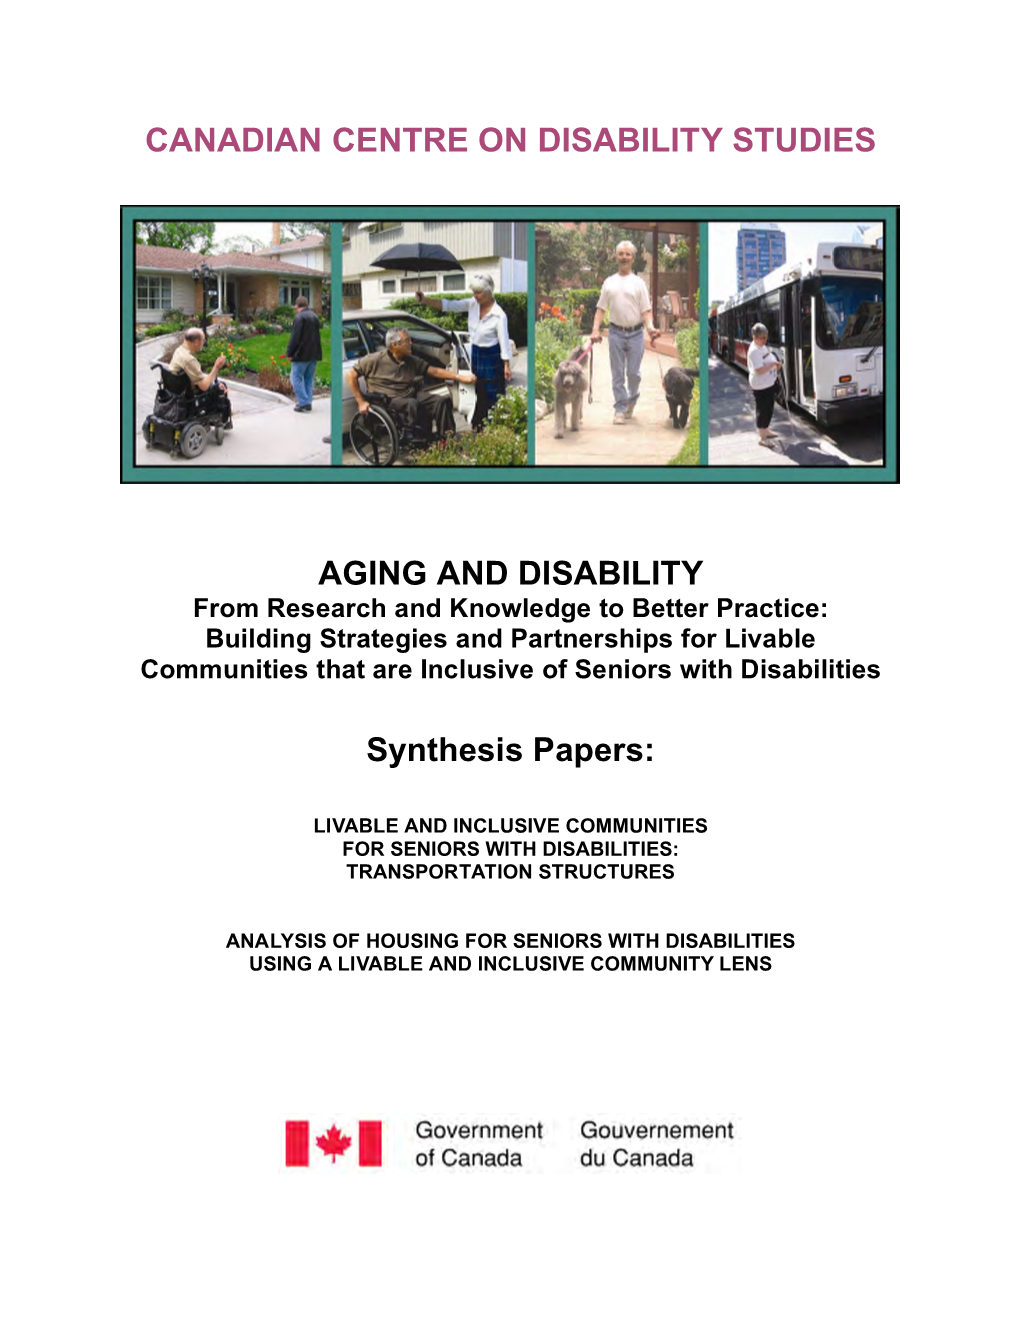 Transportation and Housing Synthesis Papers June